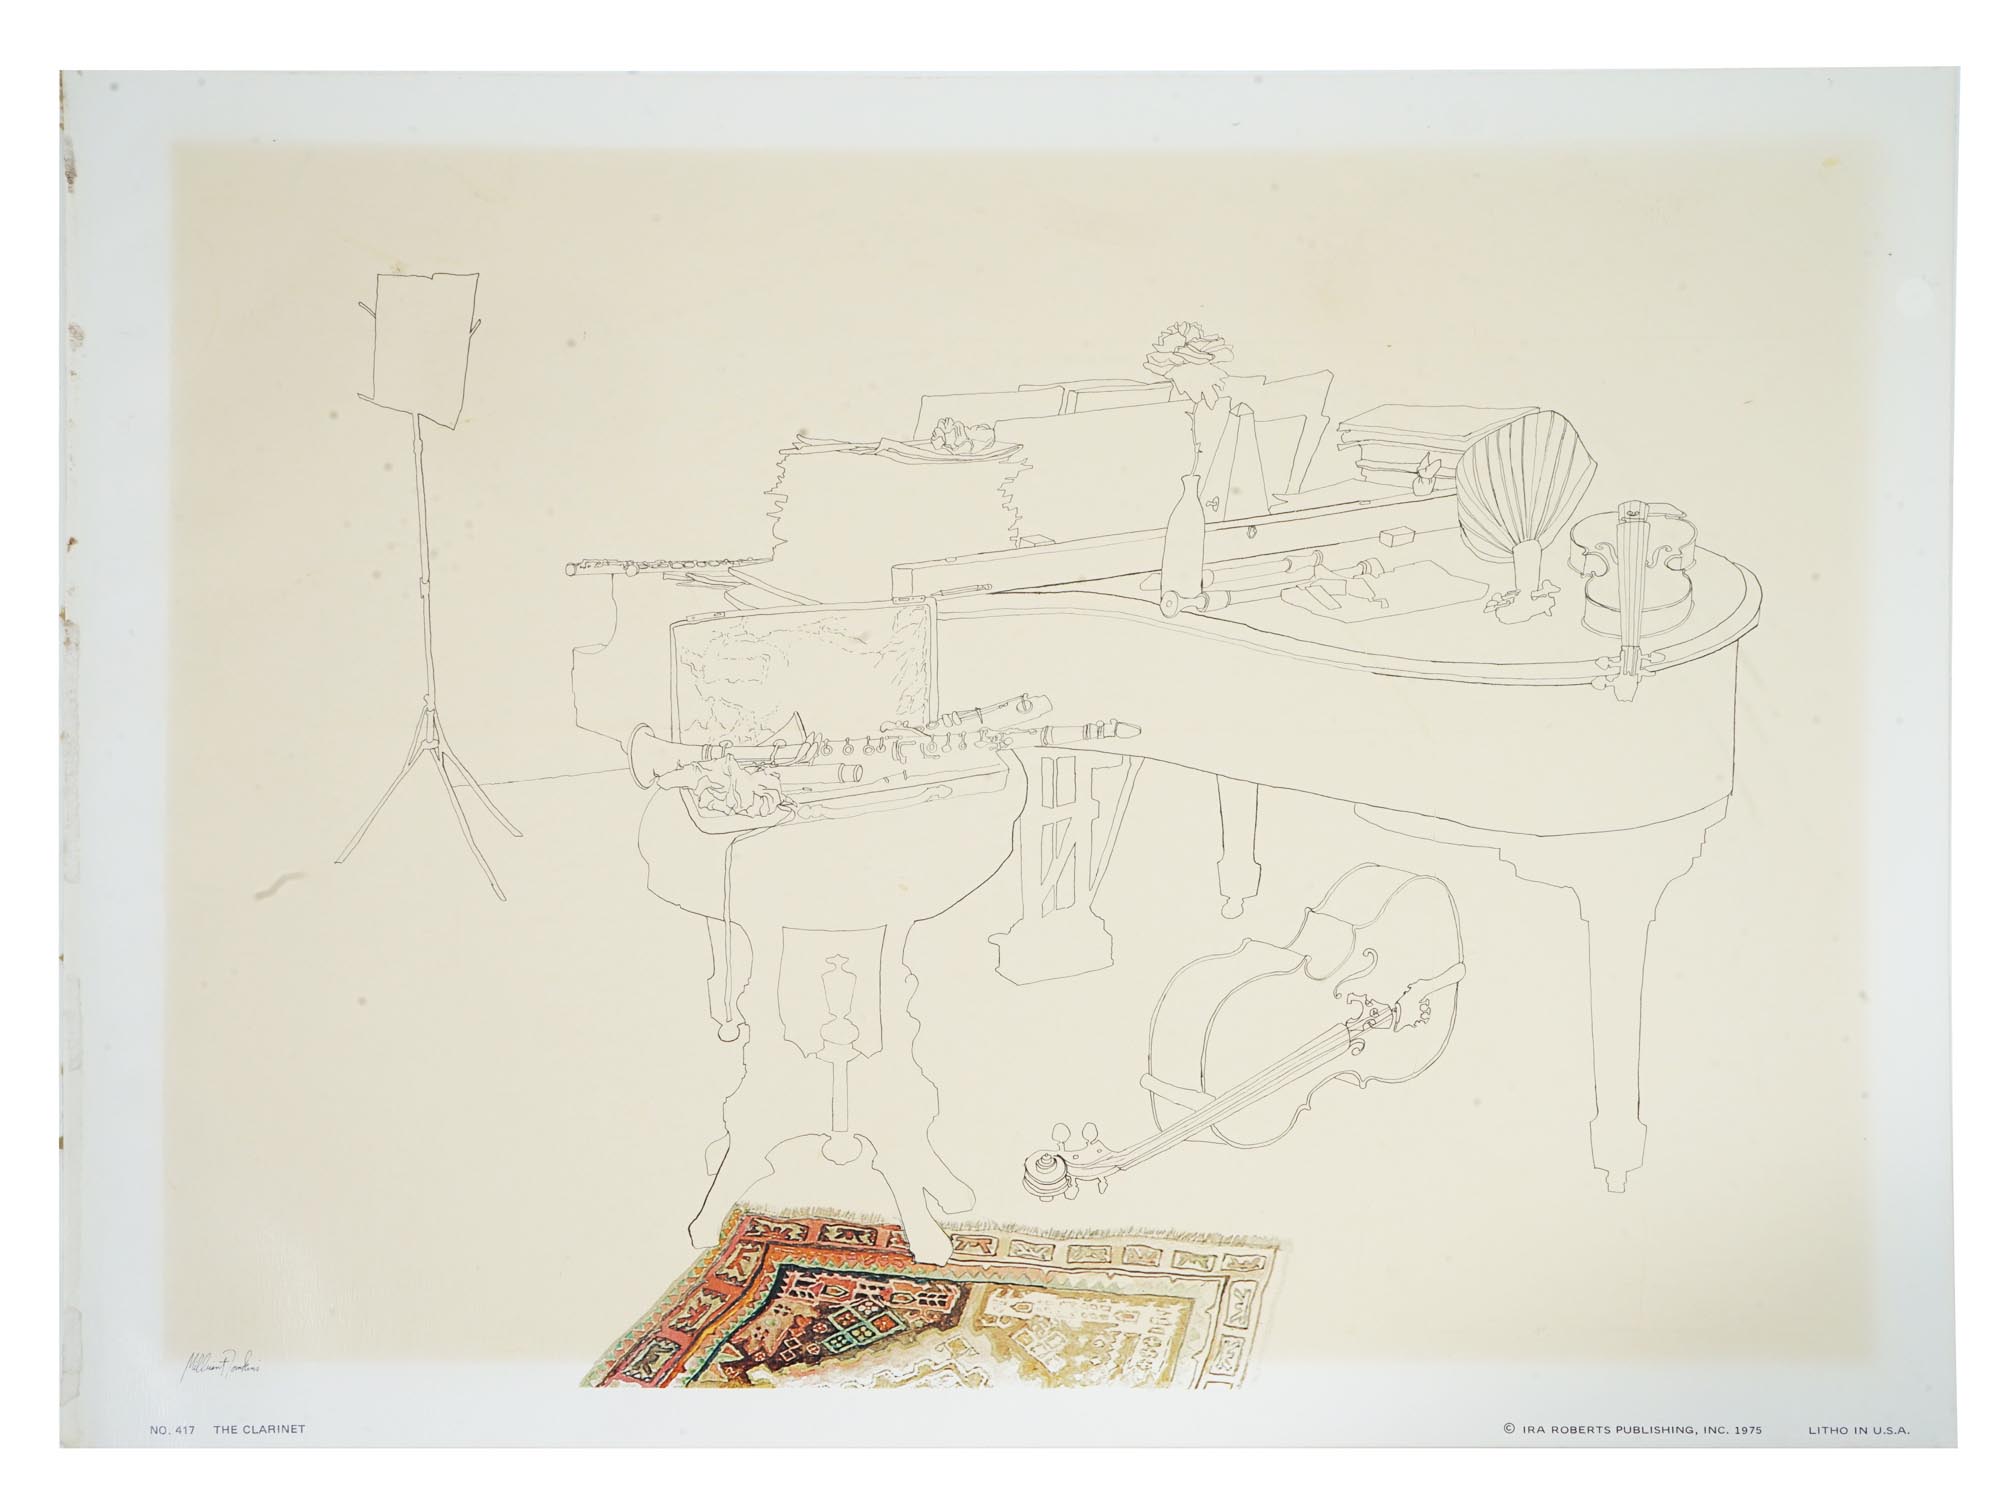 AMERICAN CLARINET LITHOGRAPH BY MILLICENT TOMPKINS PIC-0